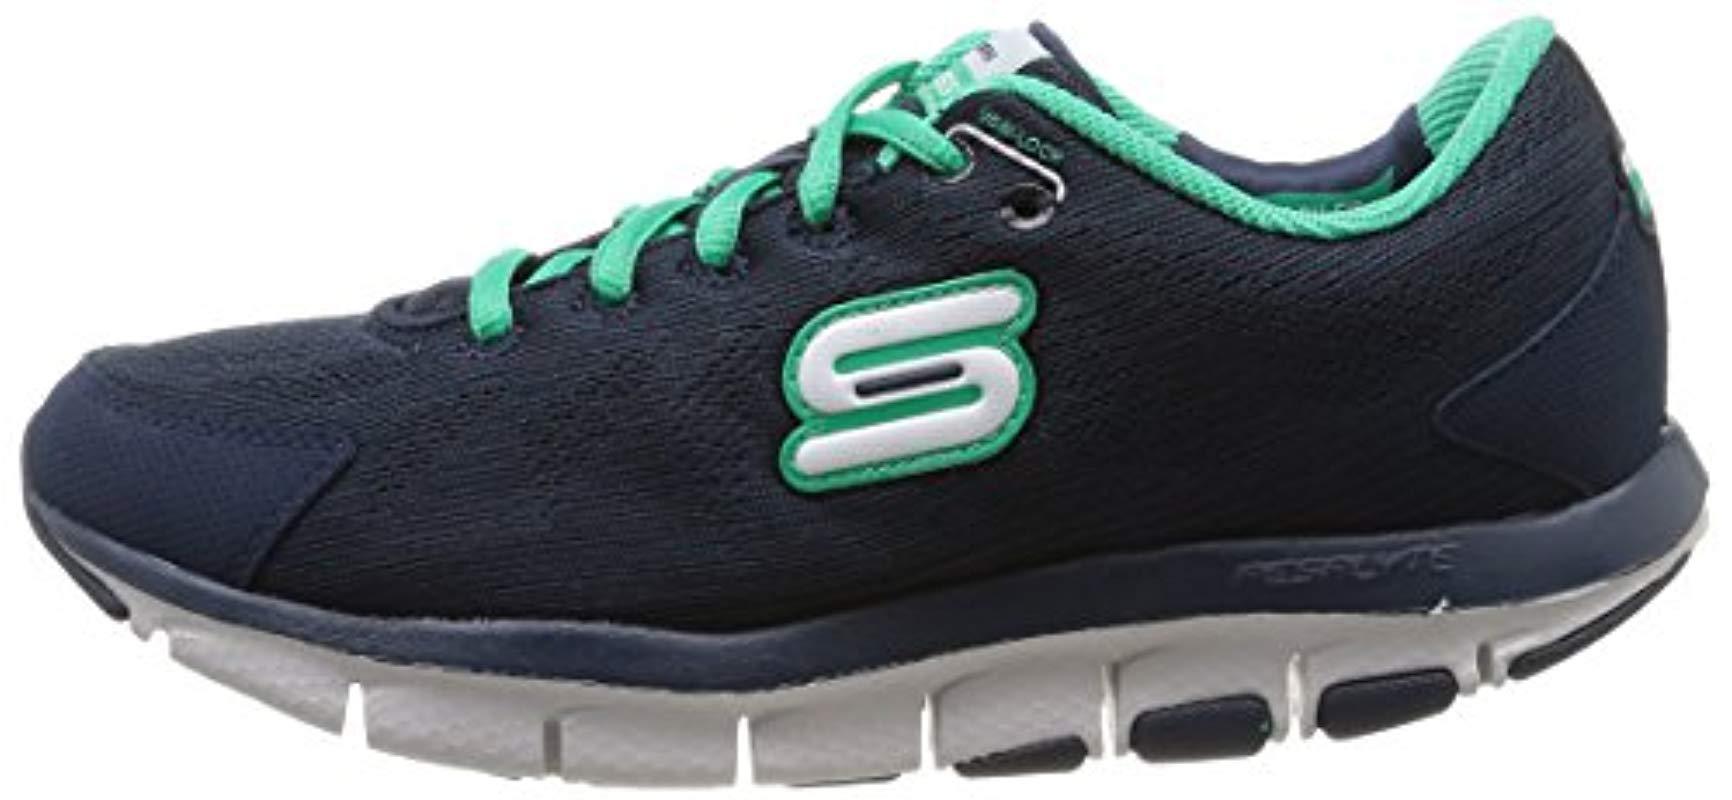 skechers rounded shoes